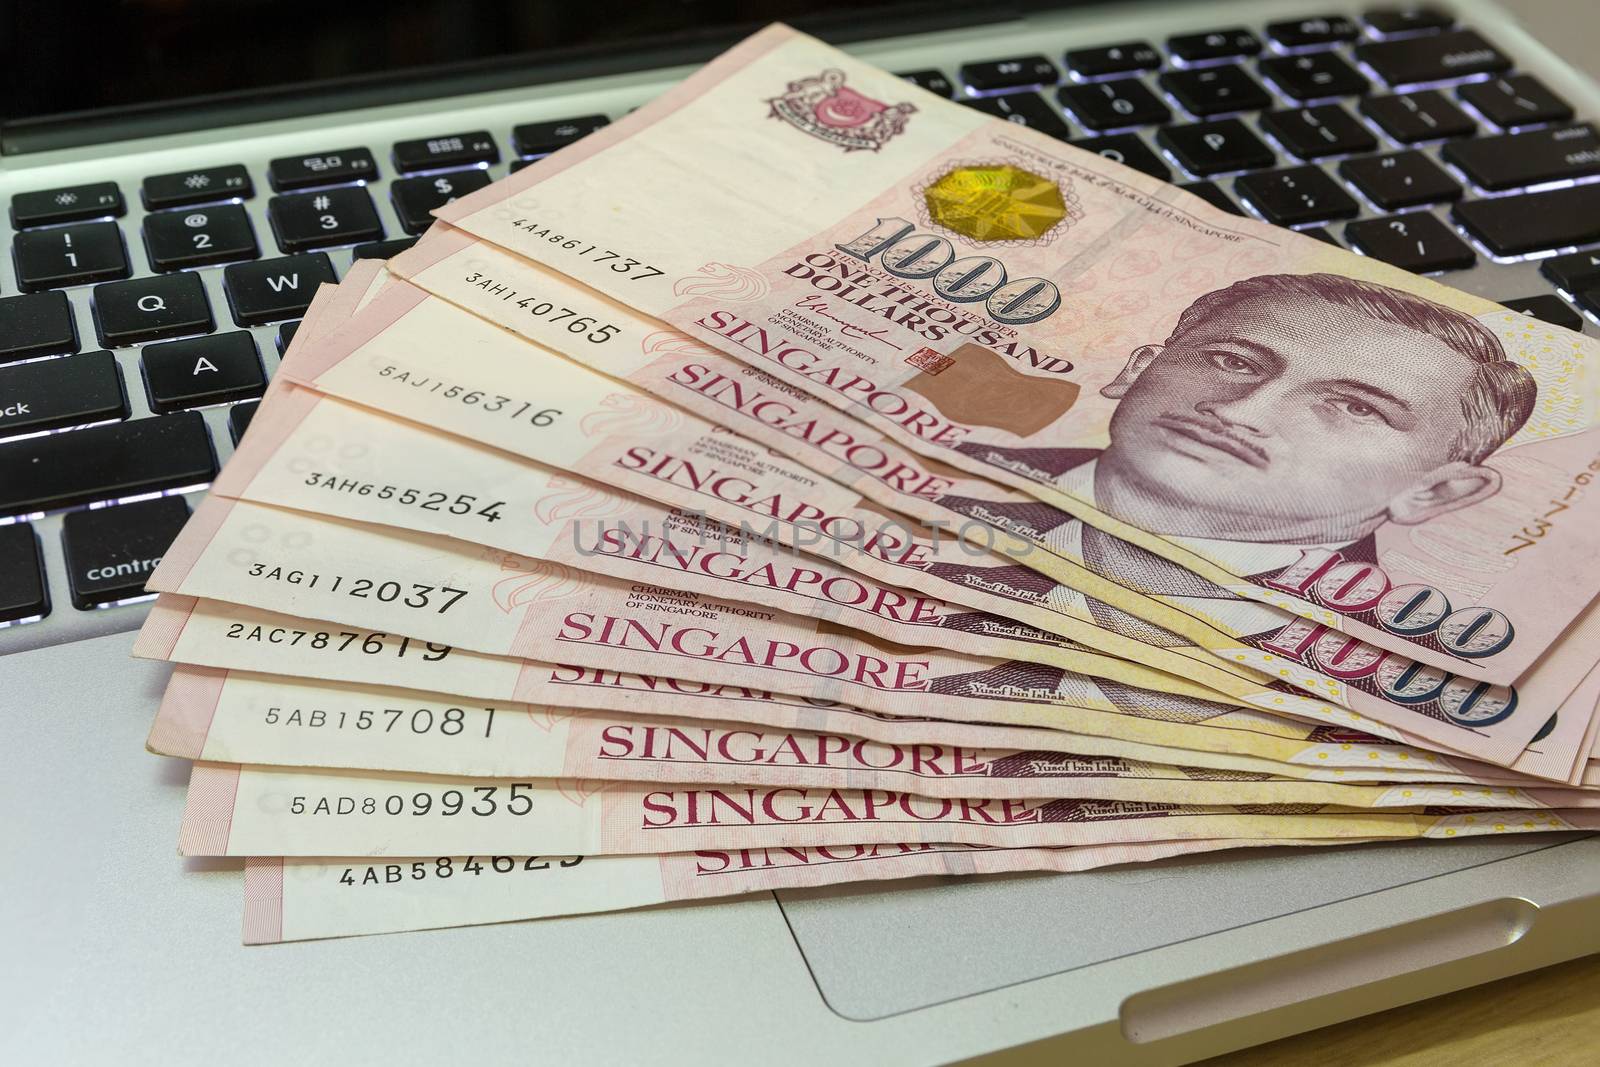 Singapore One Thousand Dollars Currency Notes on Computer by jpldesigns